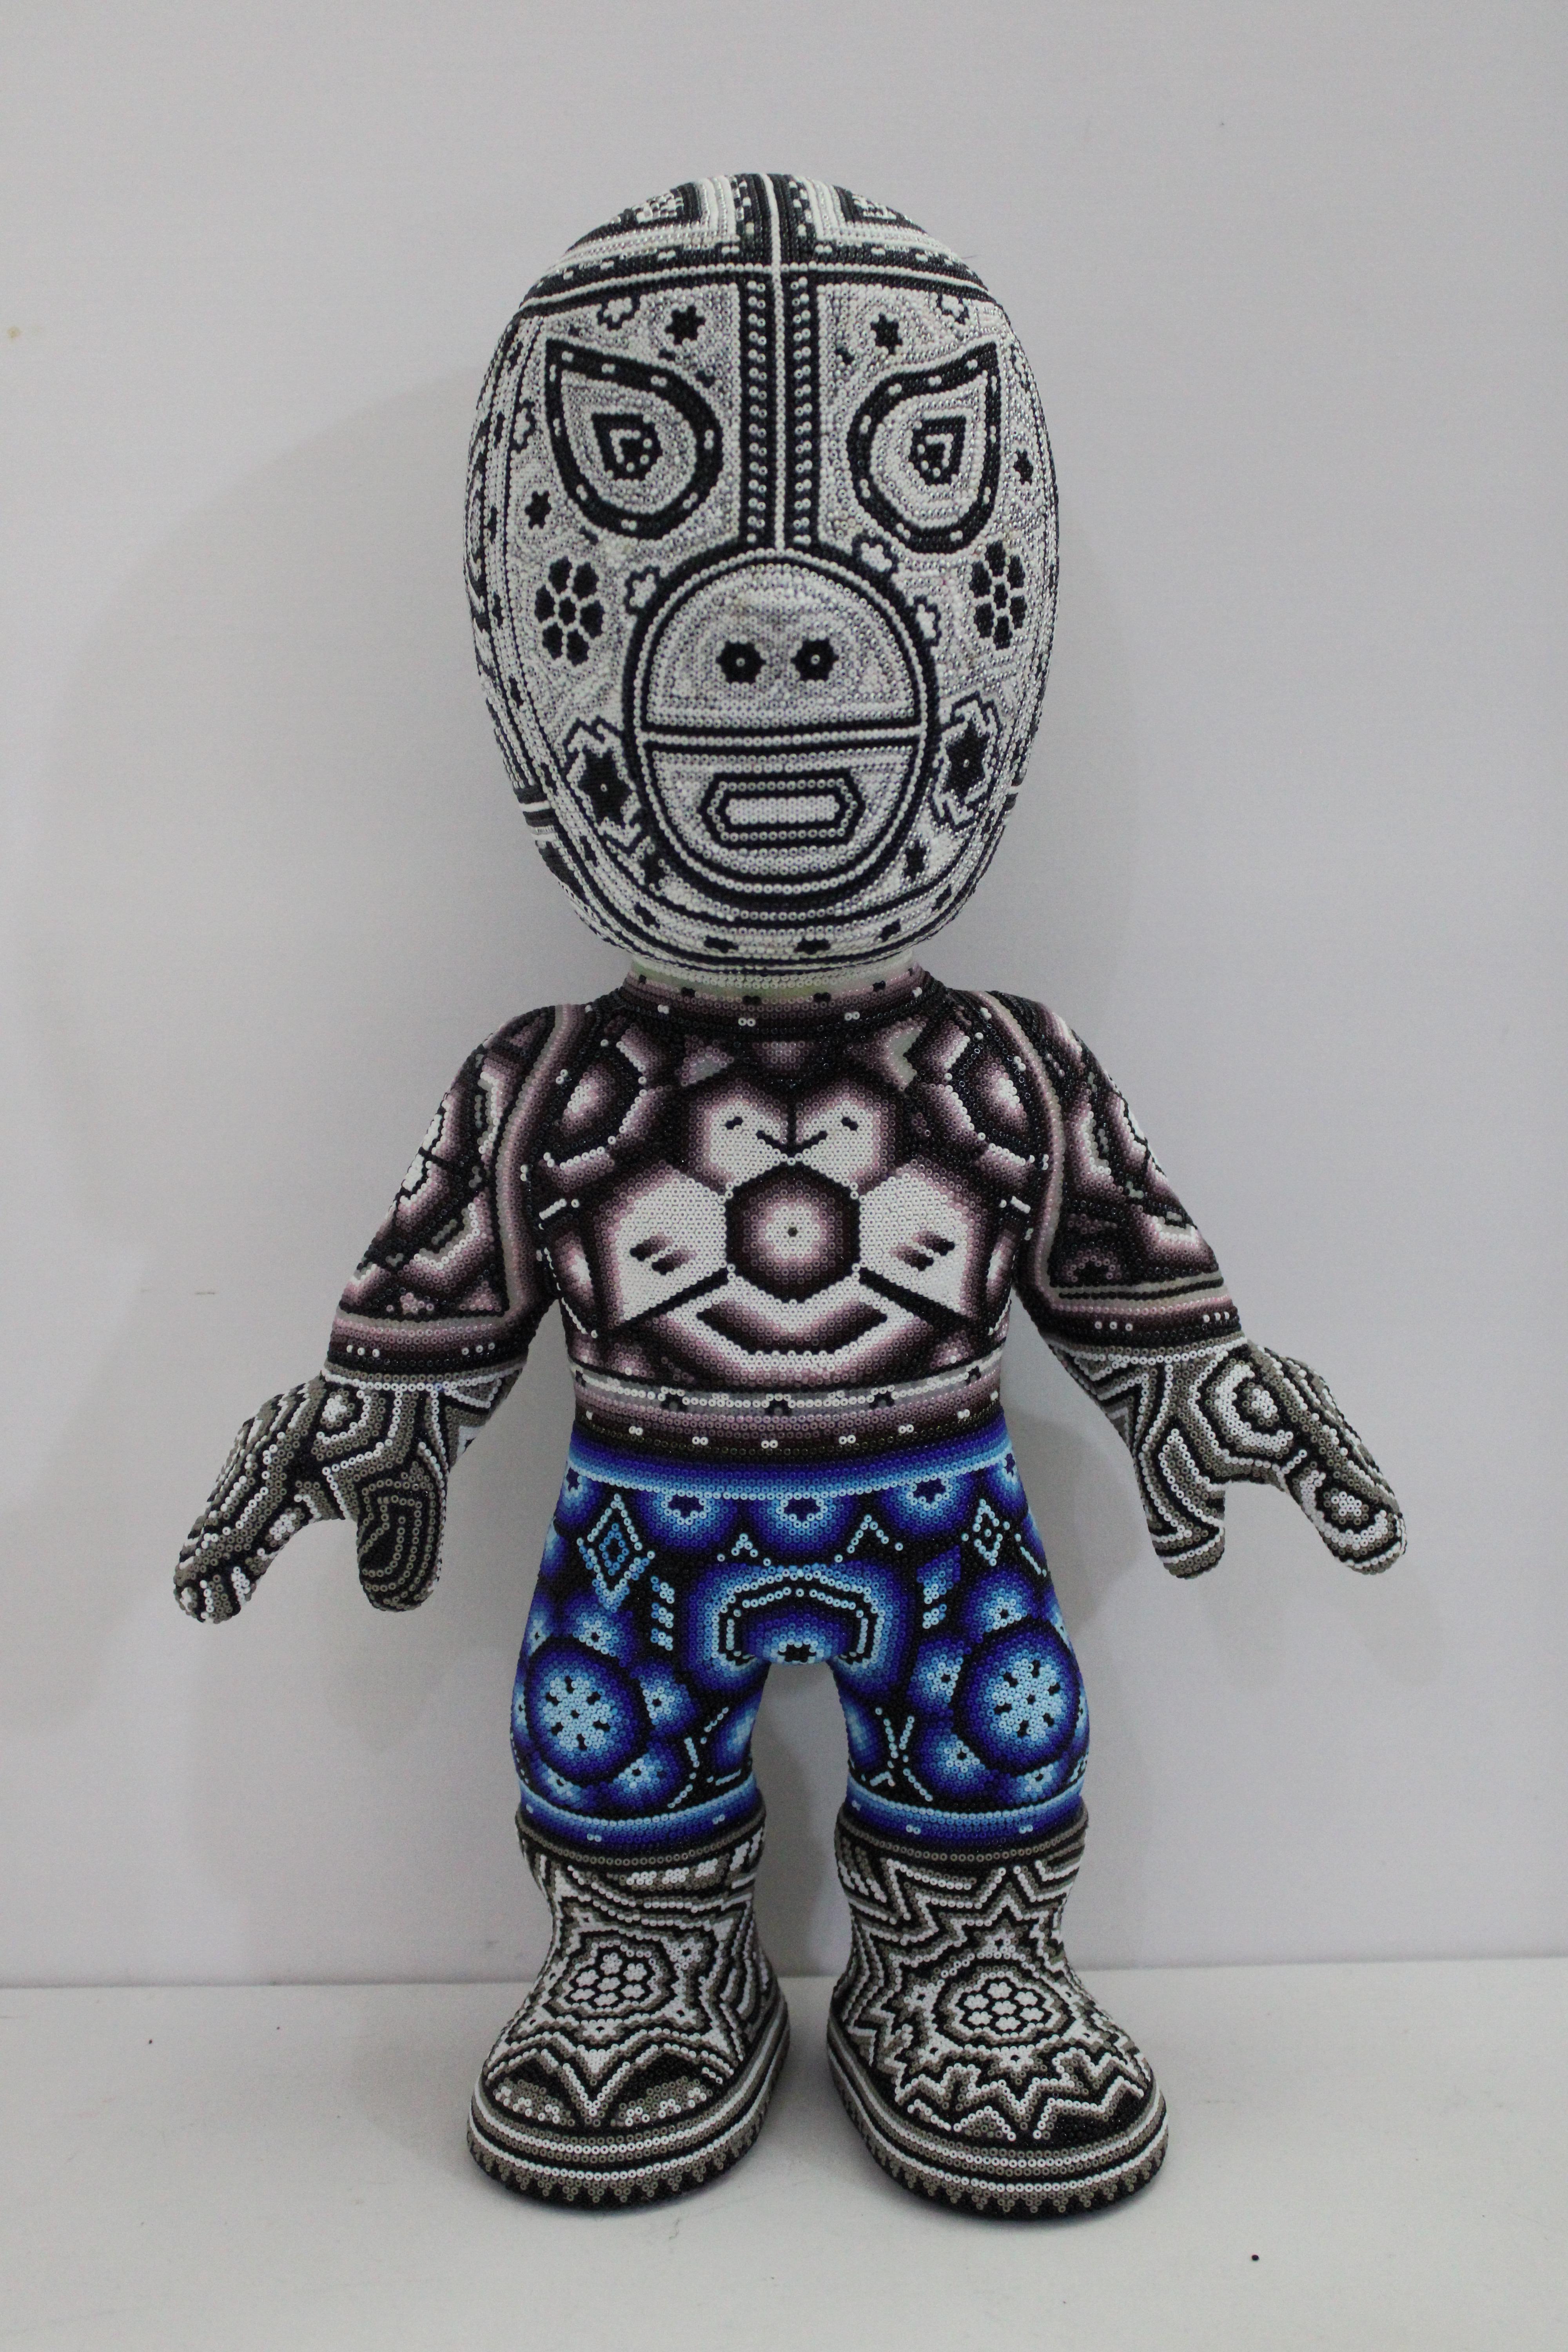 "Santo" from Huichol ALTERATIONS Series - Sculpture by CHROMA aka Rick Wolfryd 